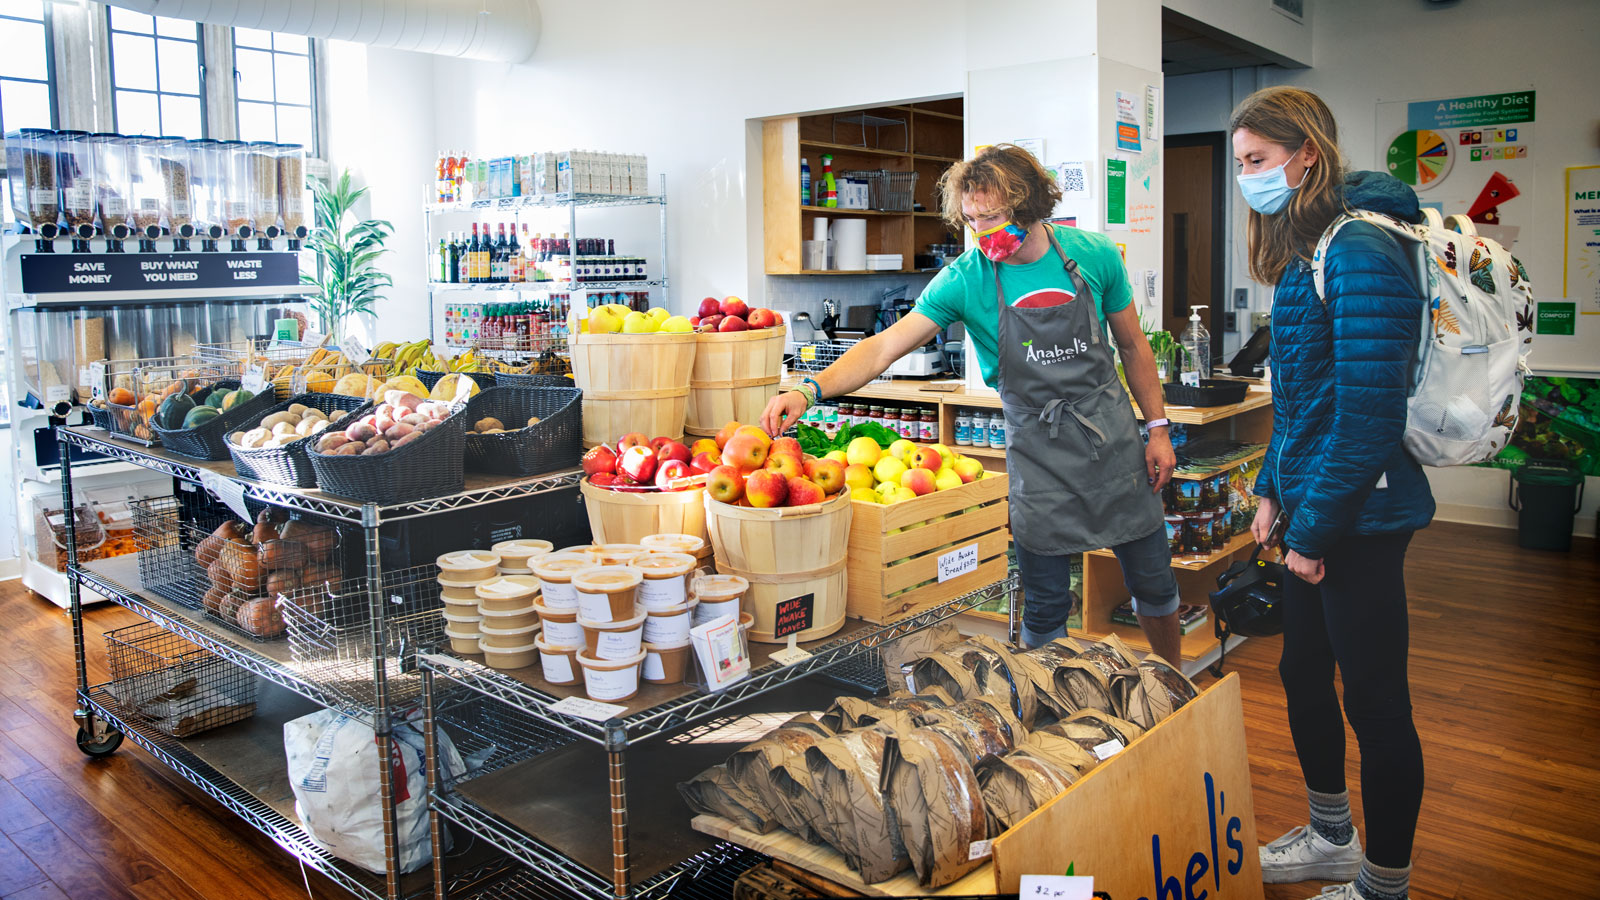 The interior of a small grocery shop with a worker in an apron and a customer wearing a backpack, looking at produce.